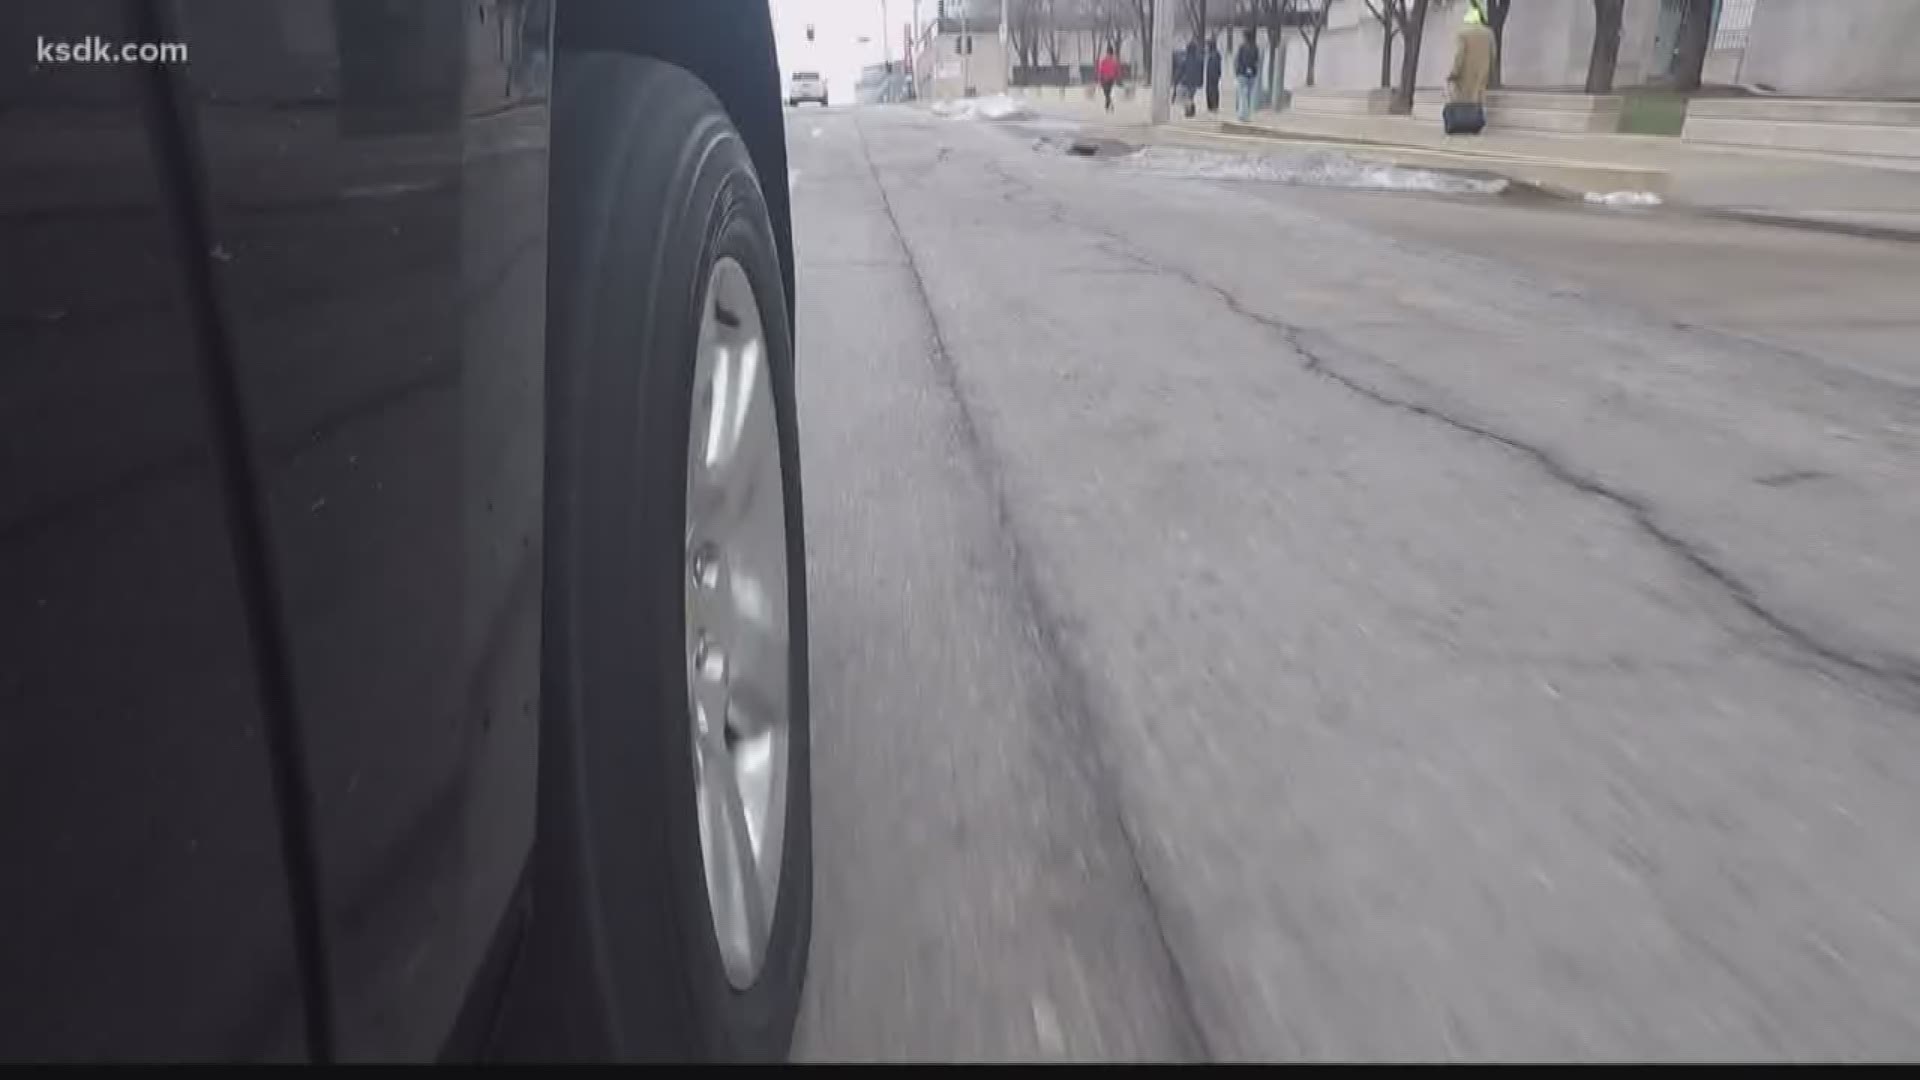 Pro driver on handling more snowy roads